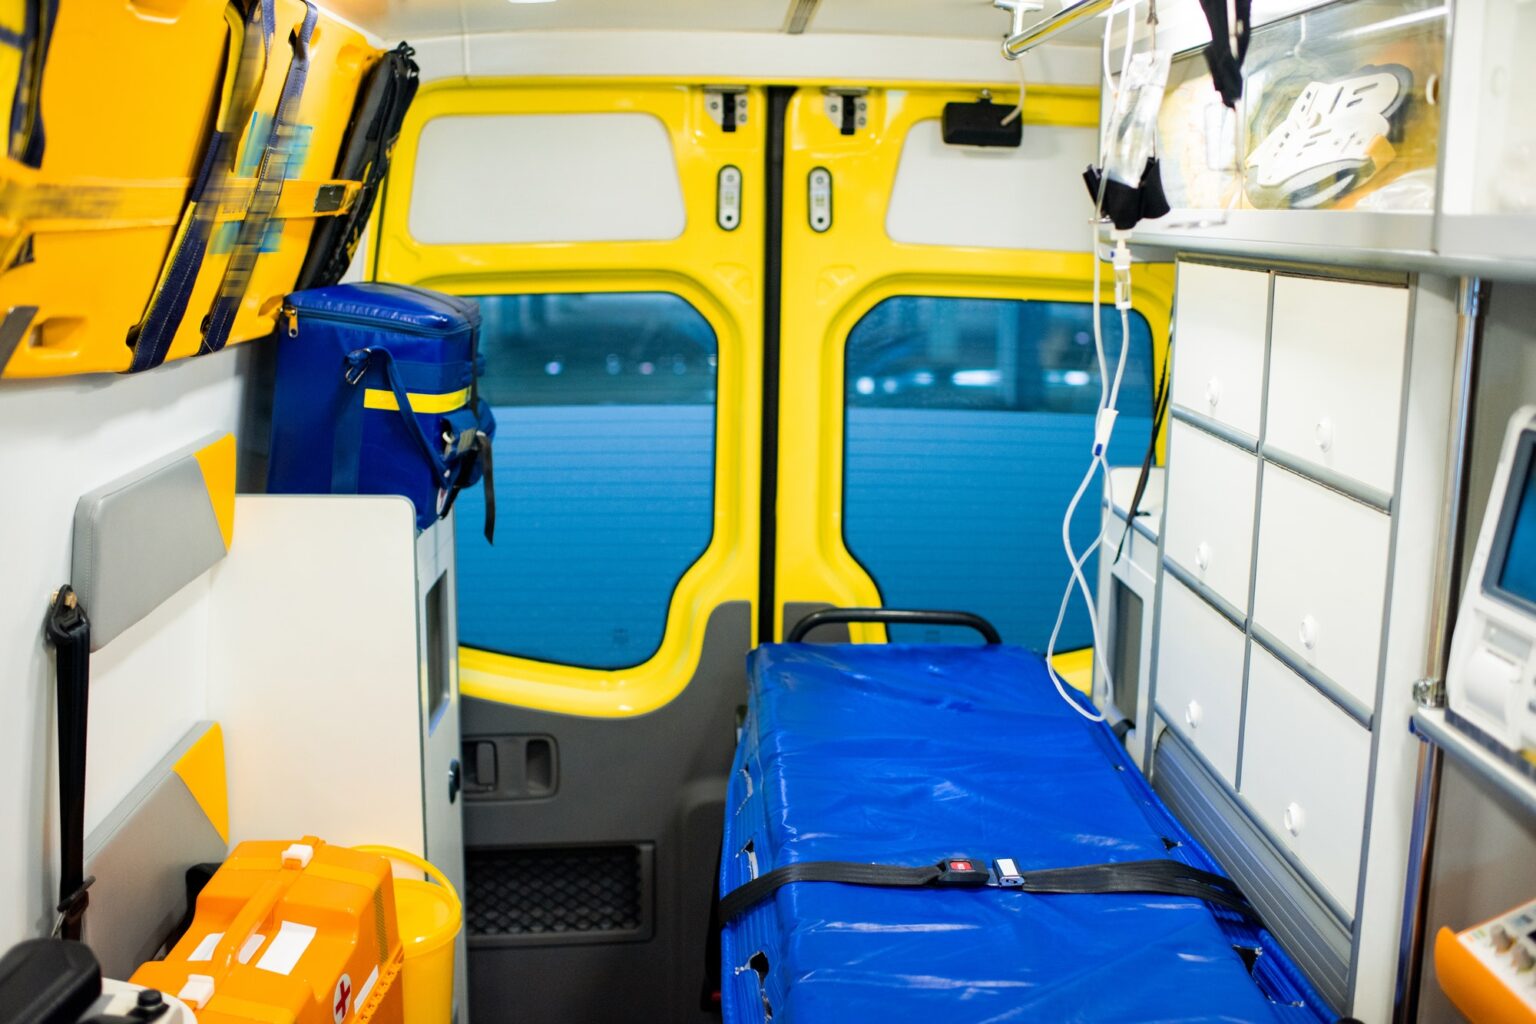 Interior of contemporary ambulance car with stretcher and medical equipment